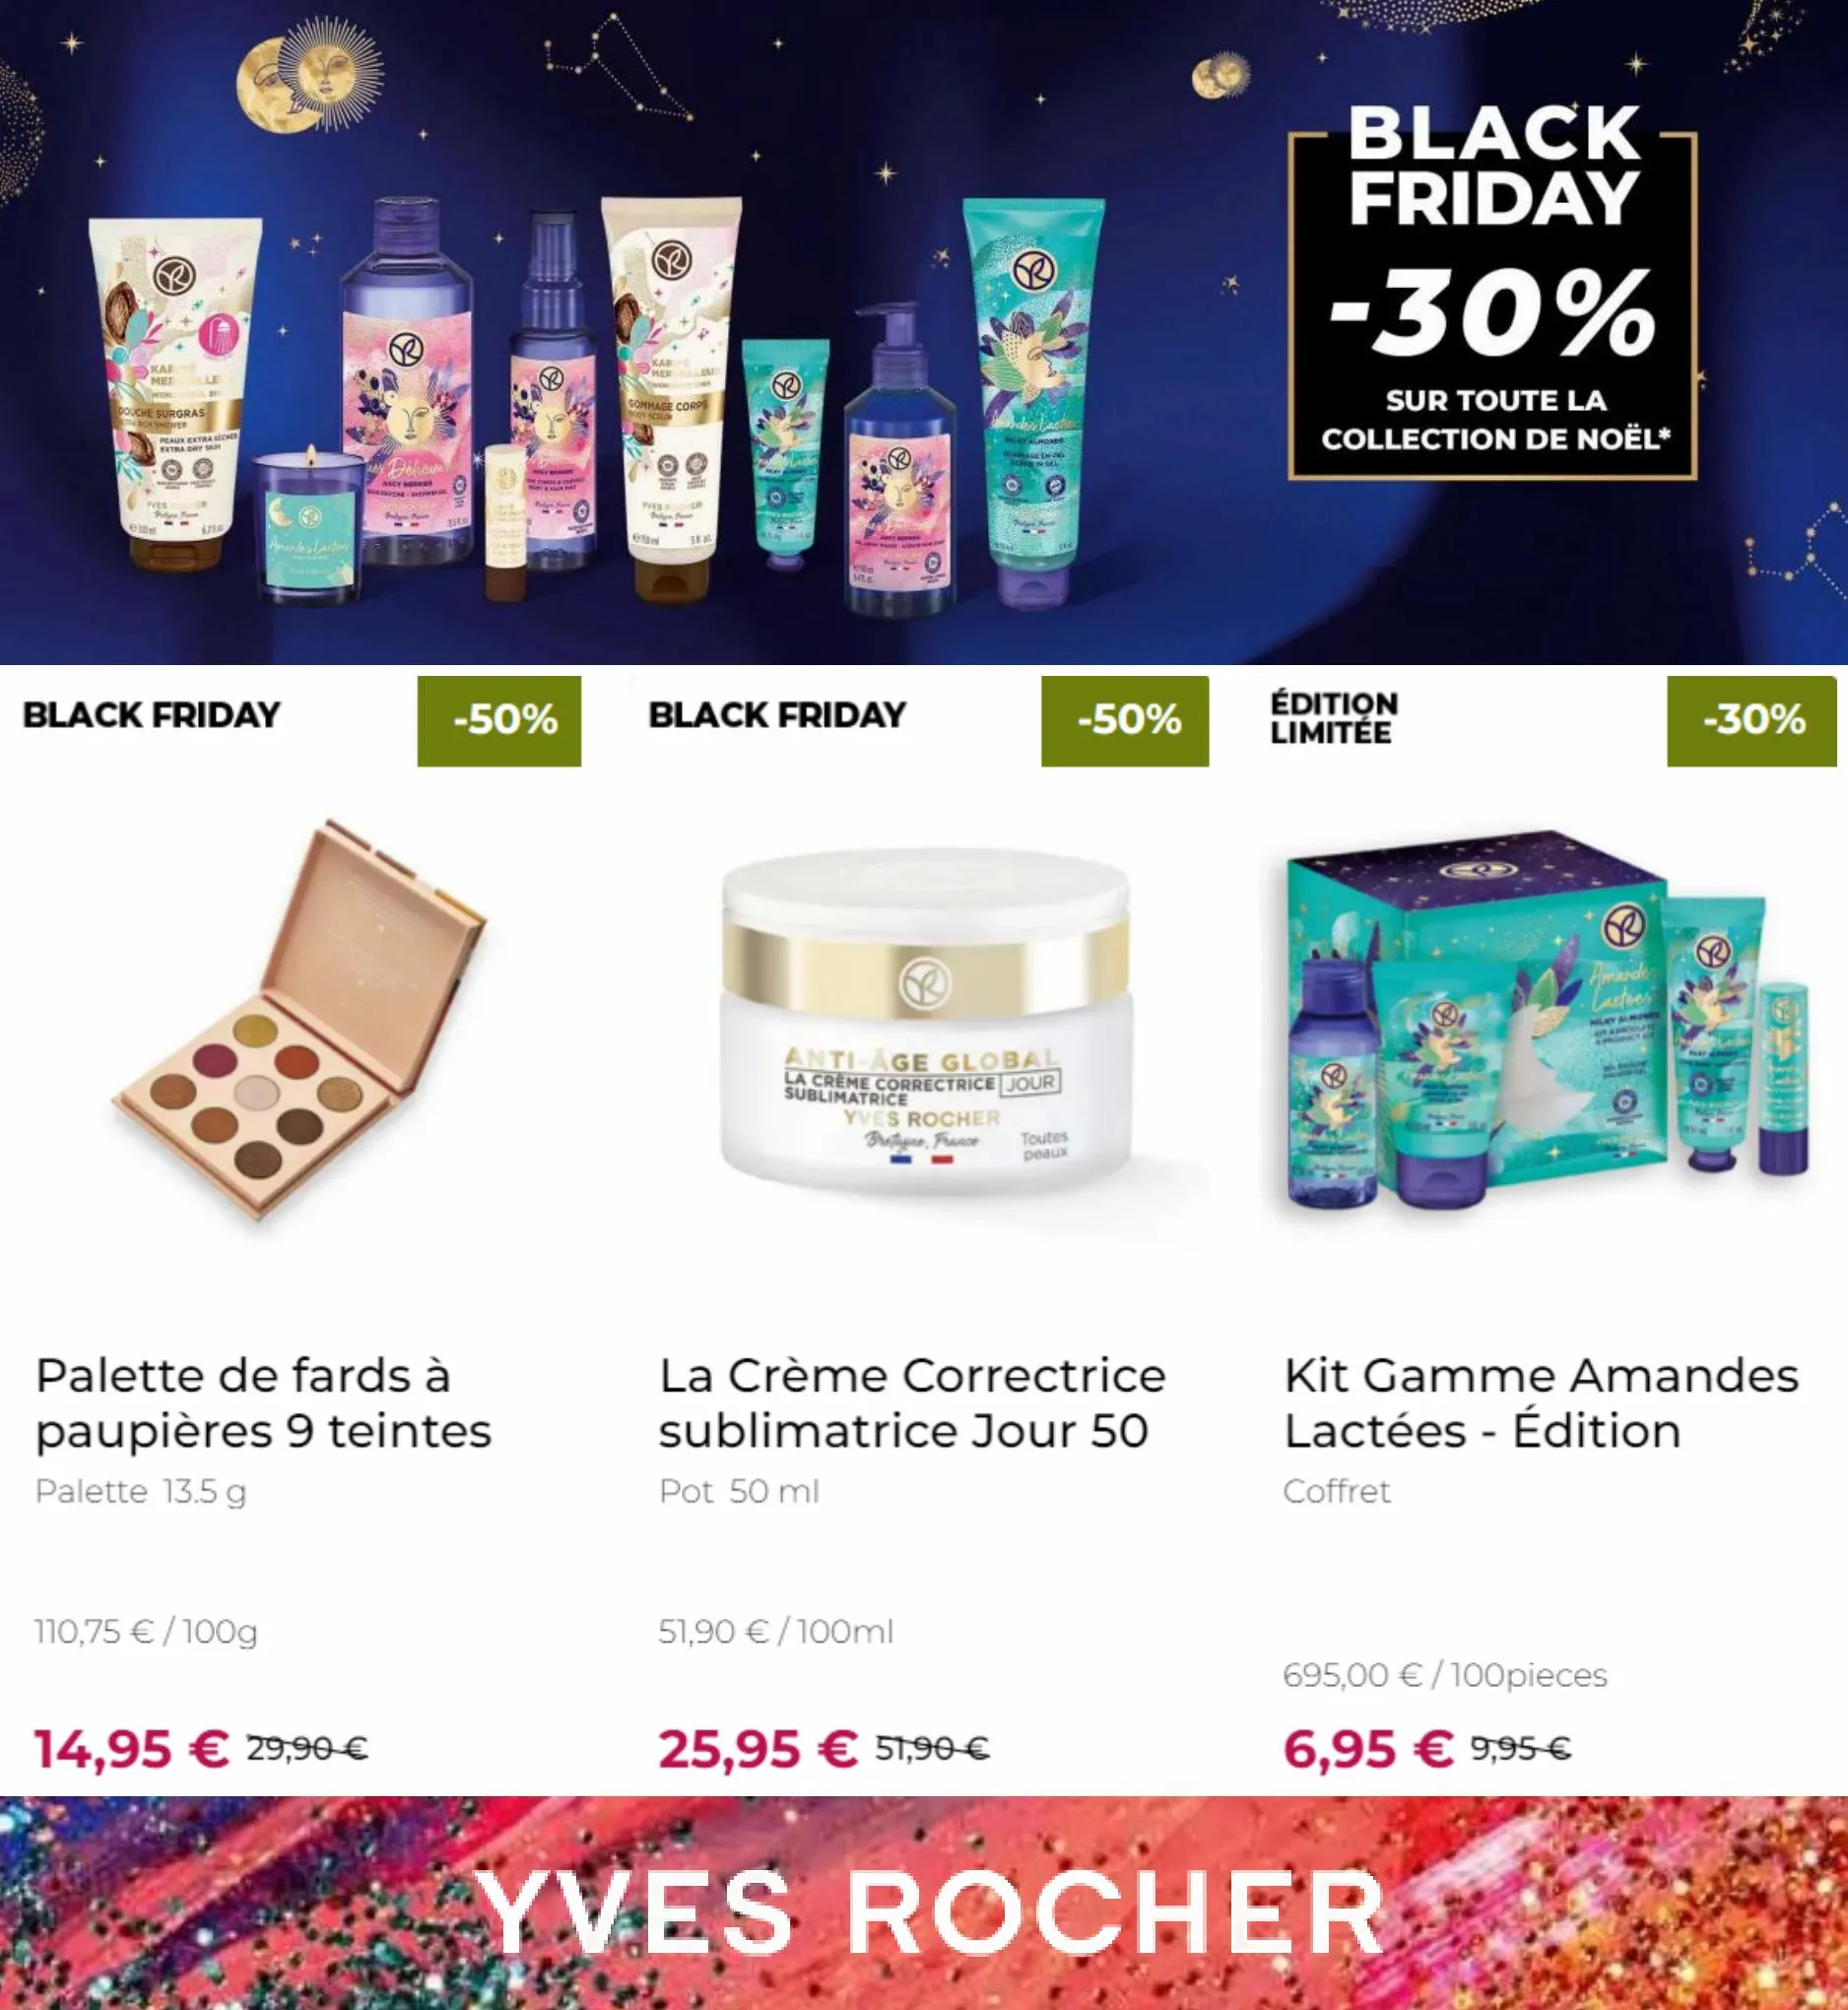 Catalogue Yves Rocher Black Friday, page 00006